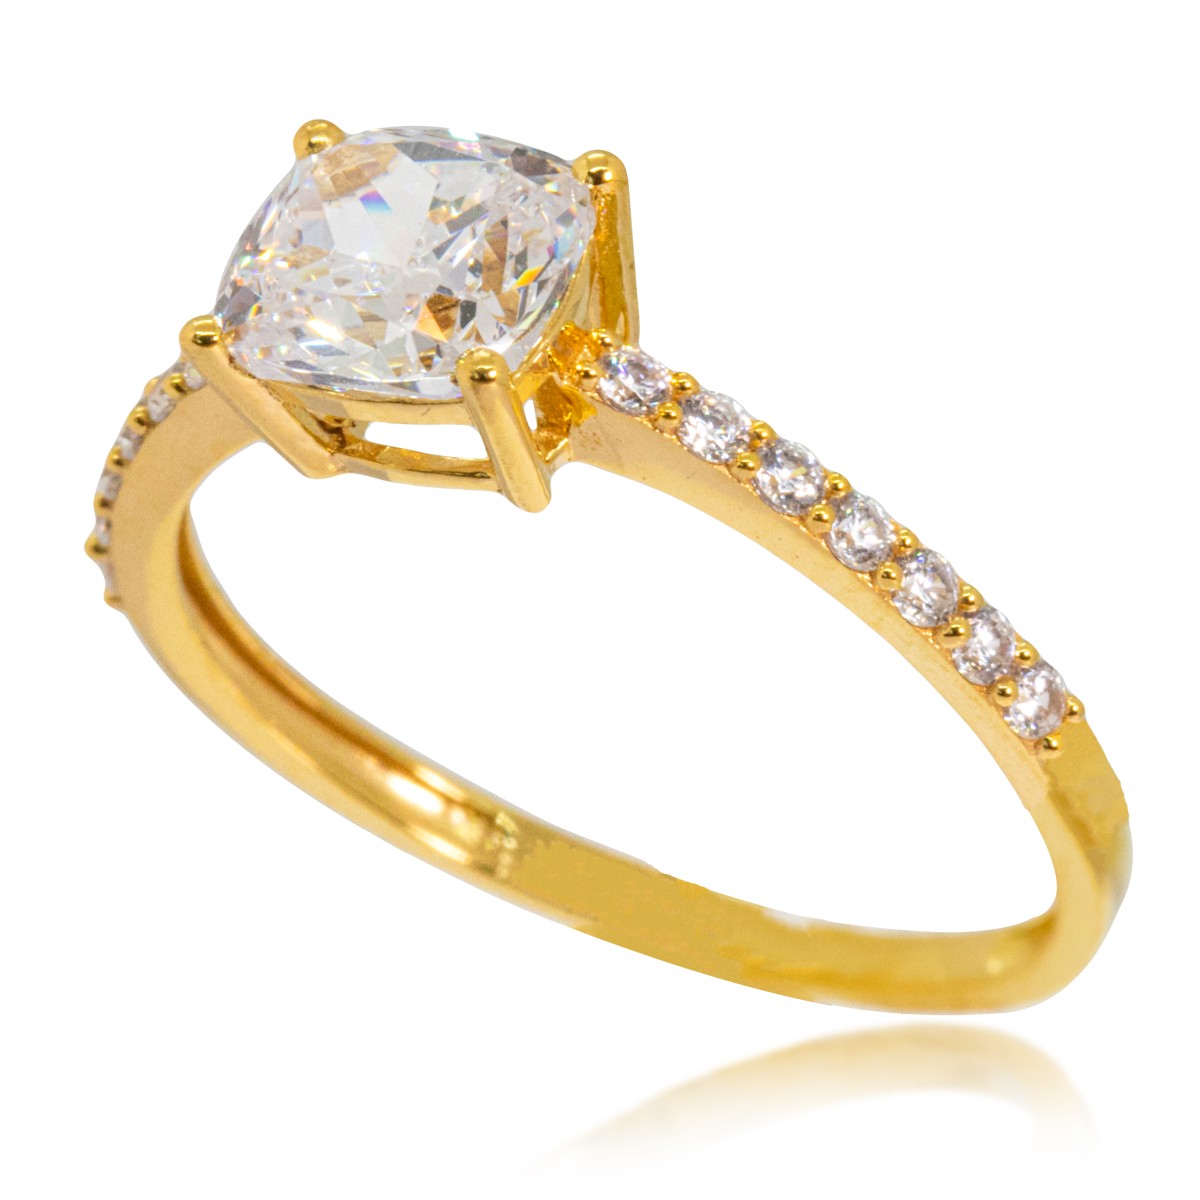 22ct Gold Pave Cushion Cut Ring